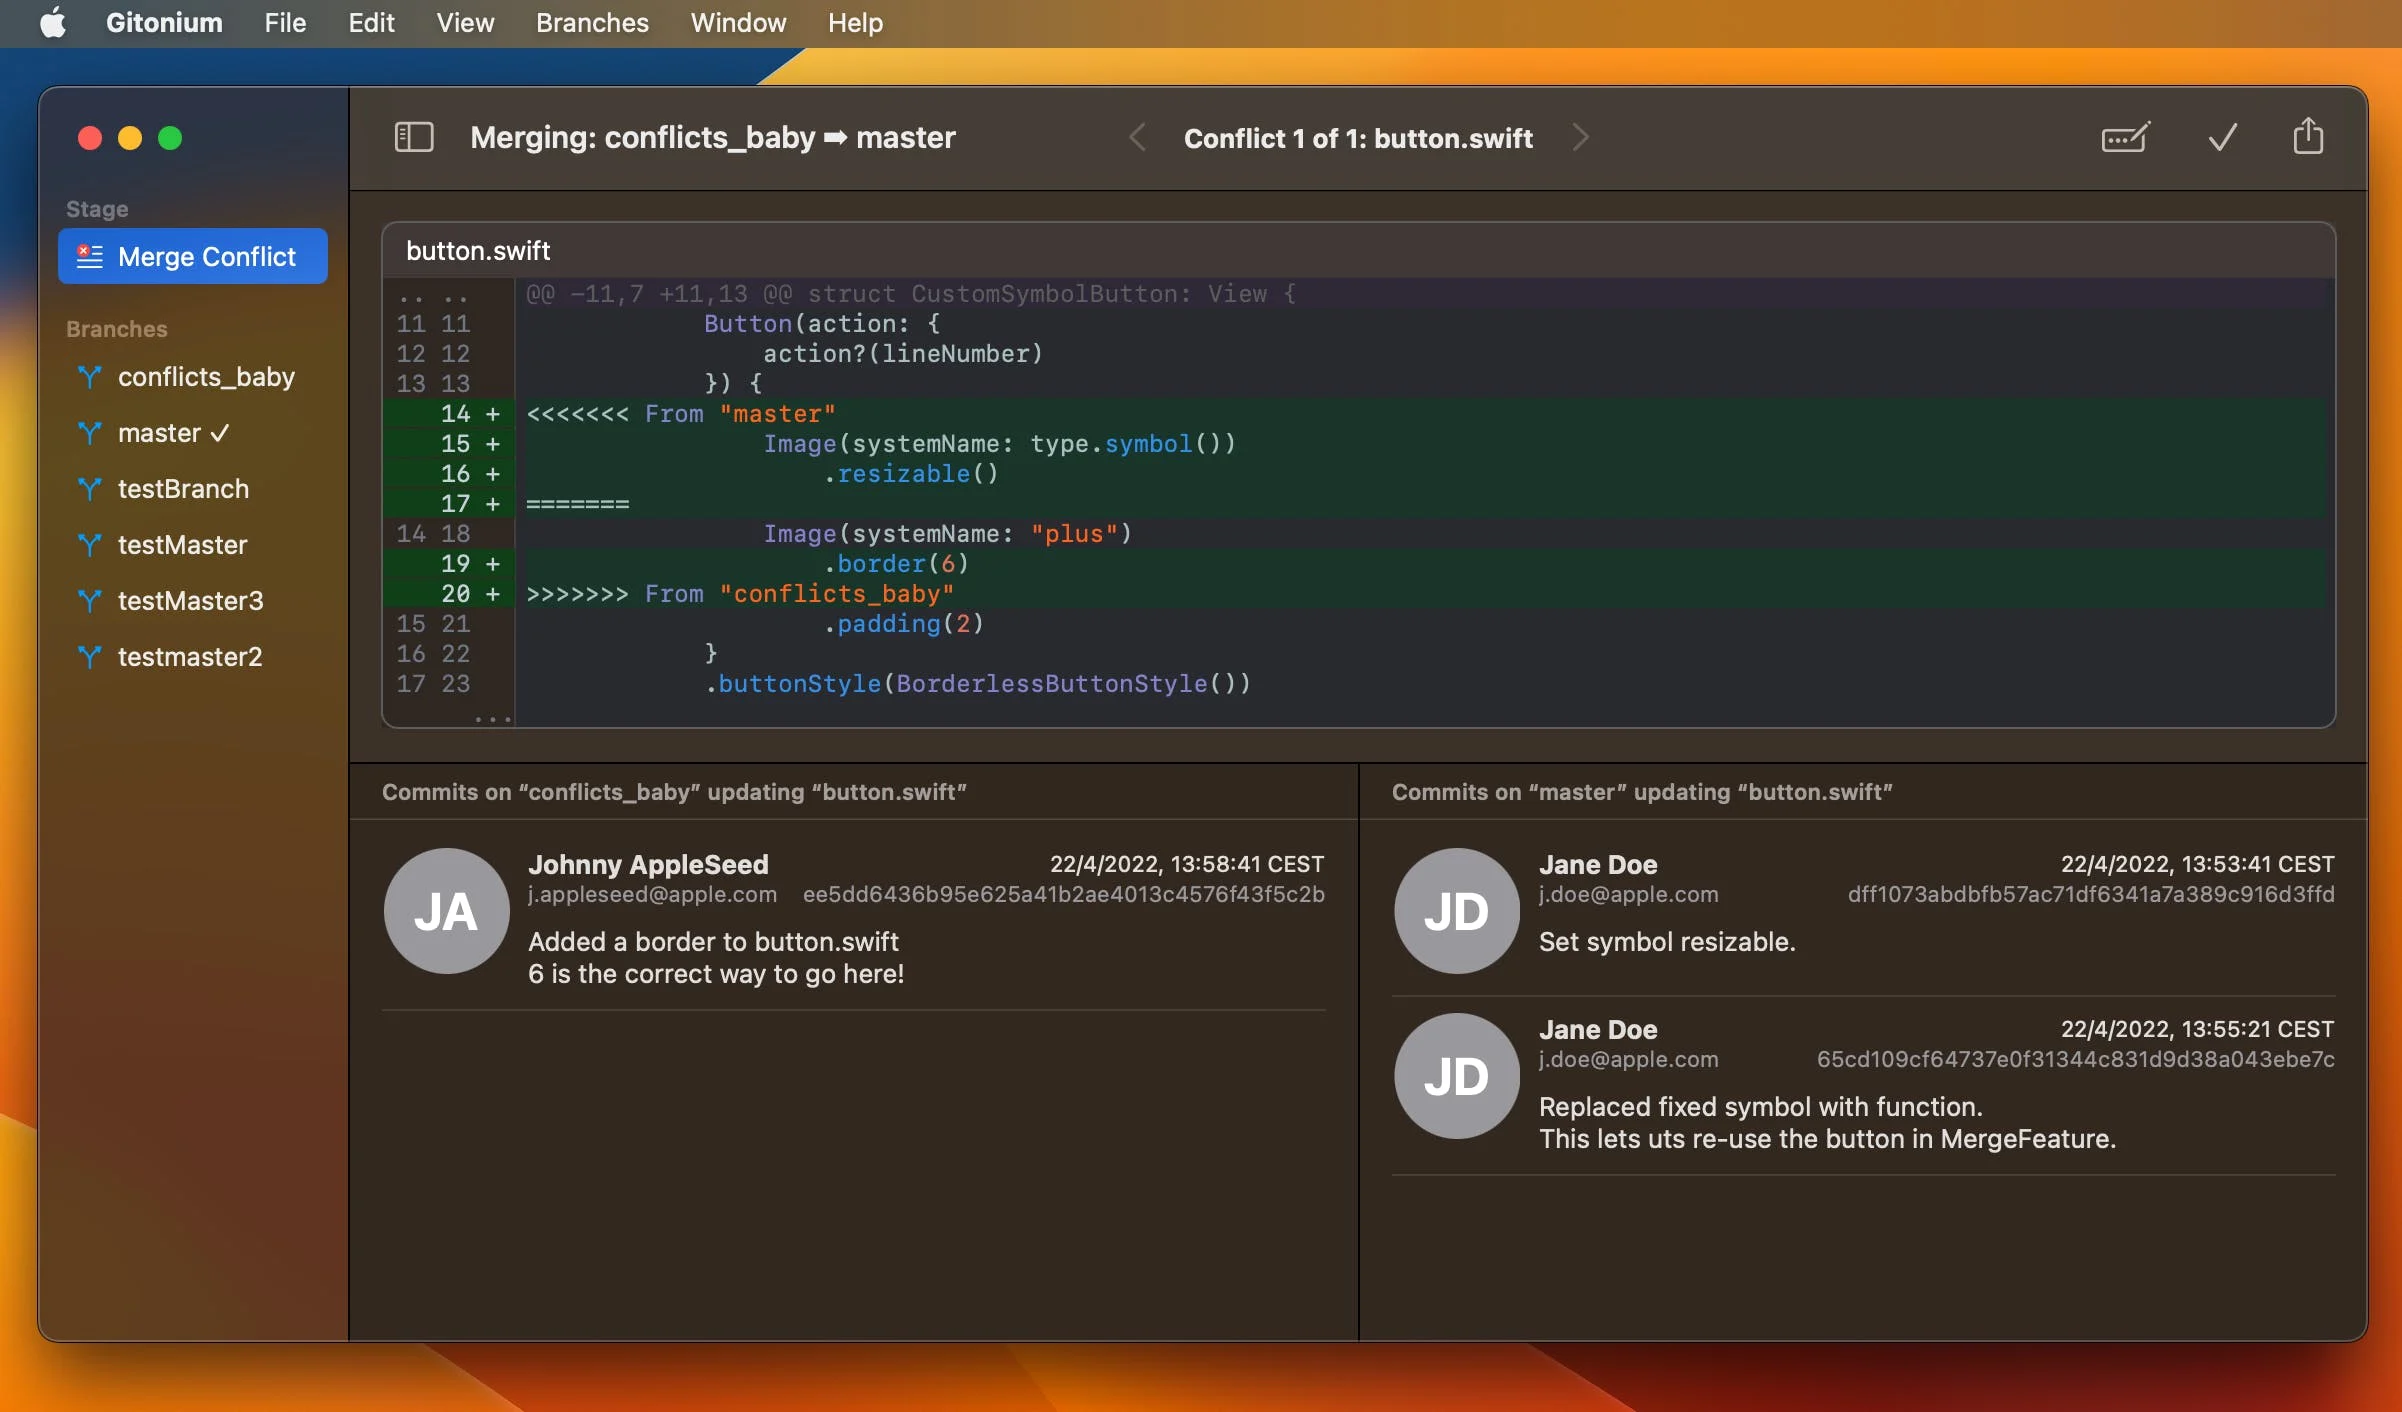 Screenshot of the new merge conflict view in Gitonium.